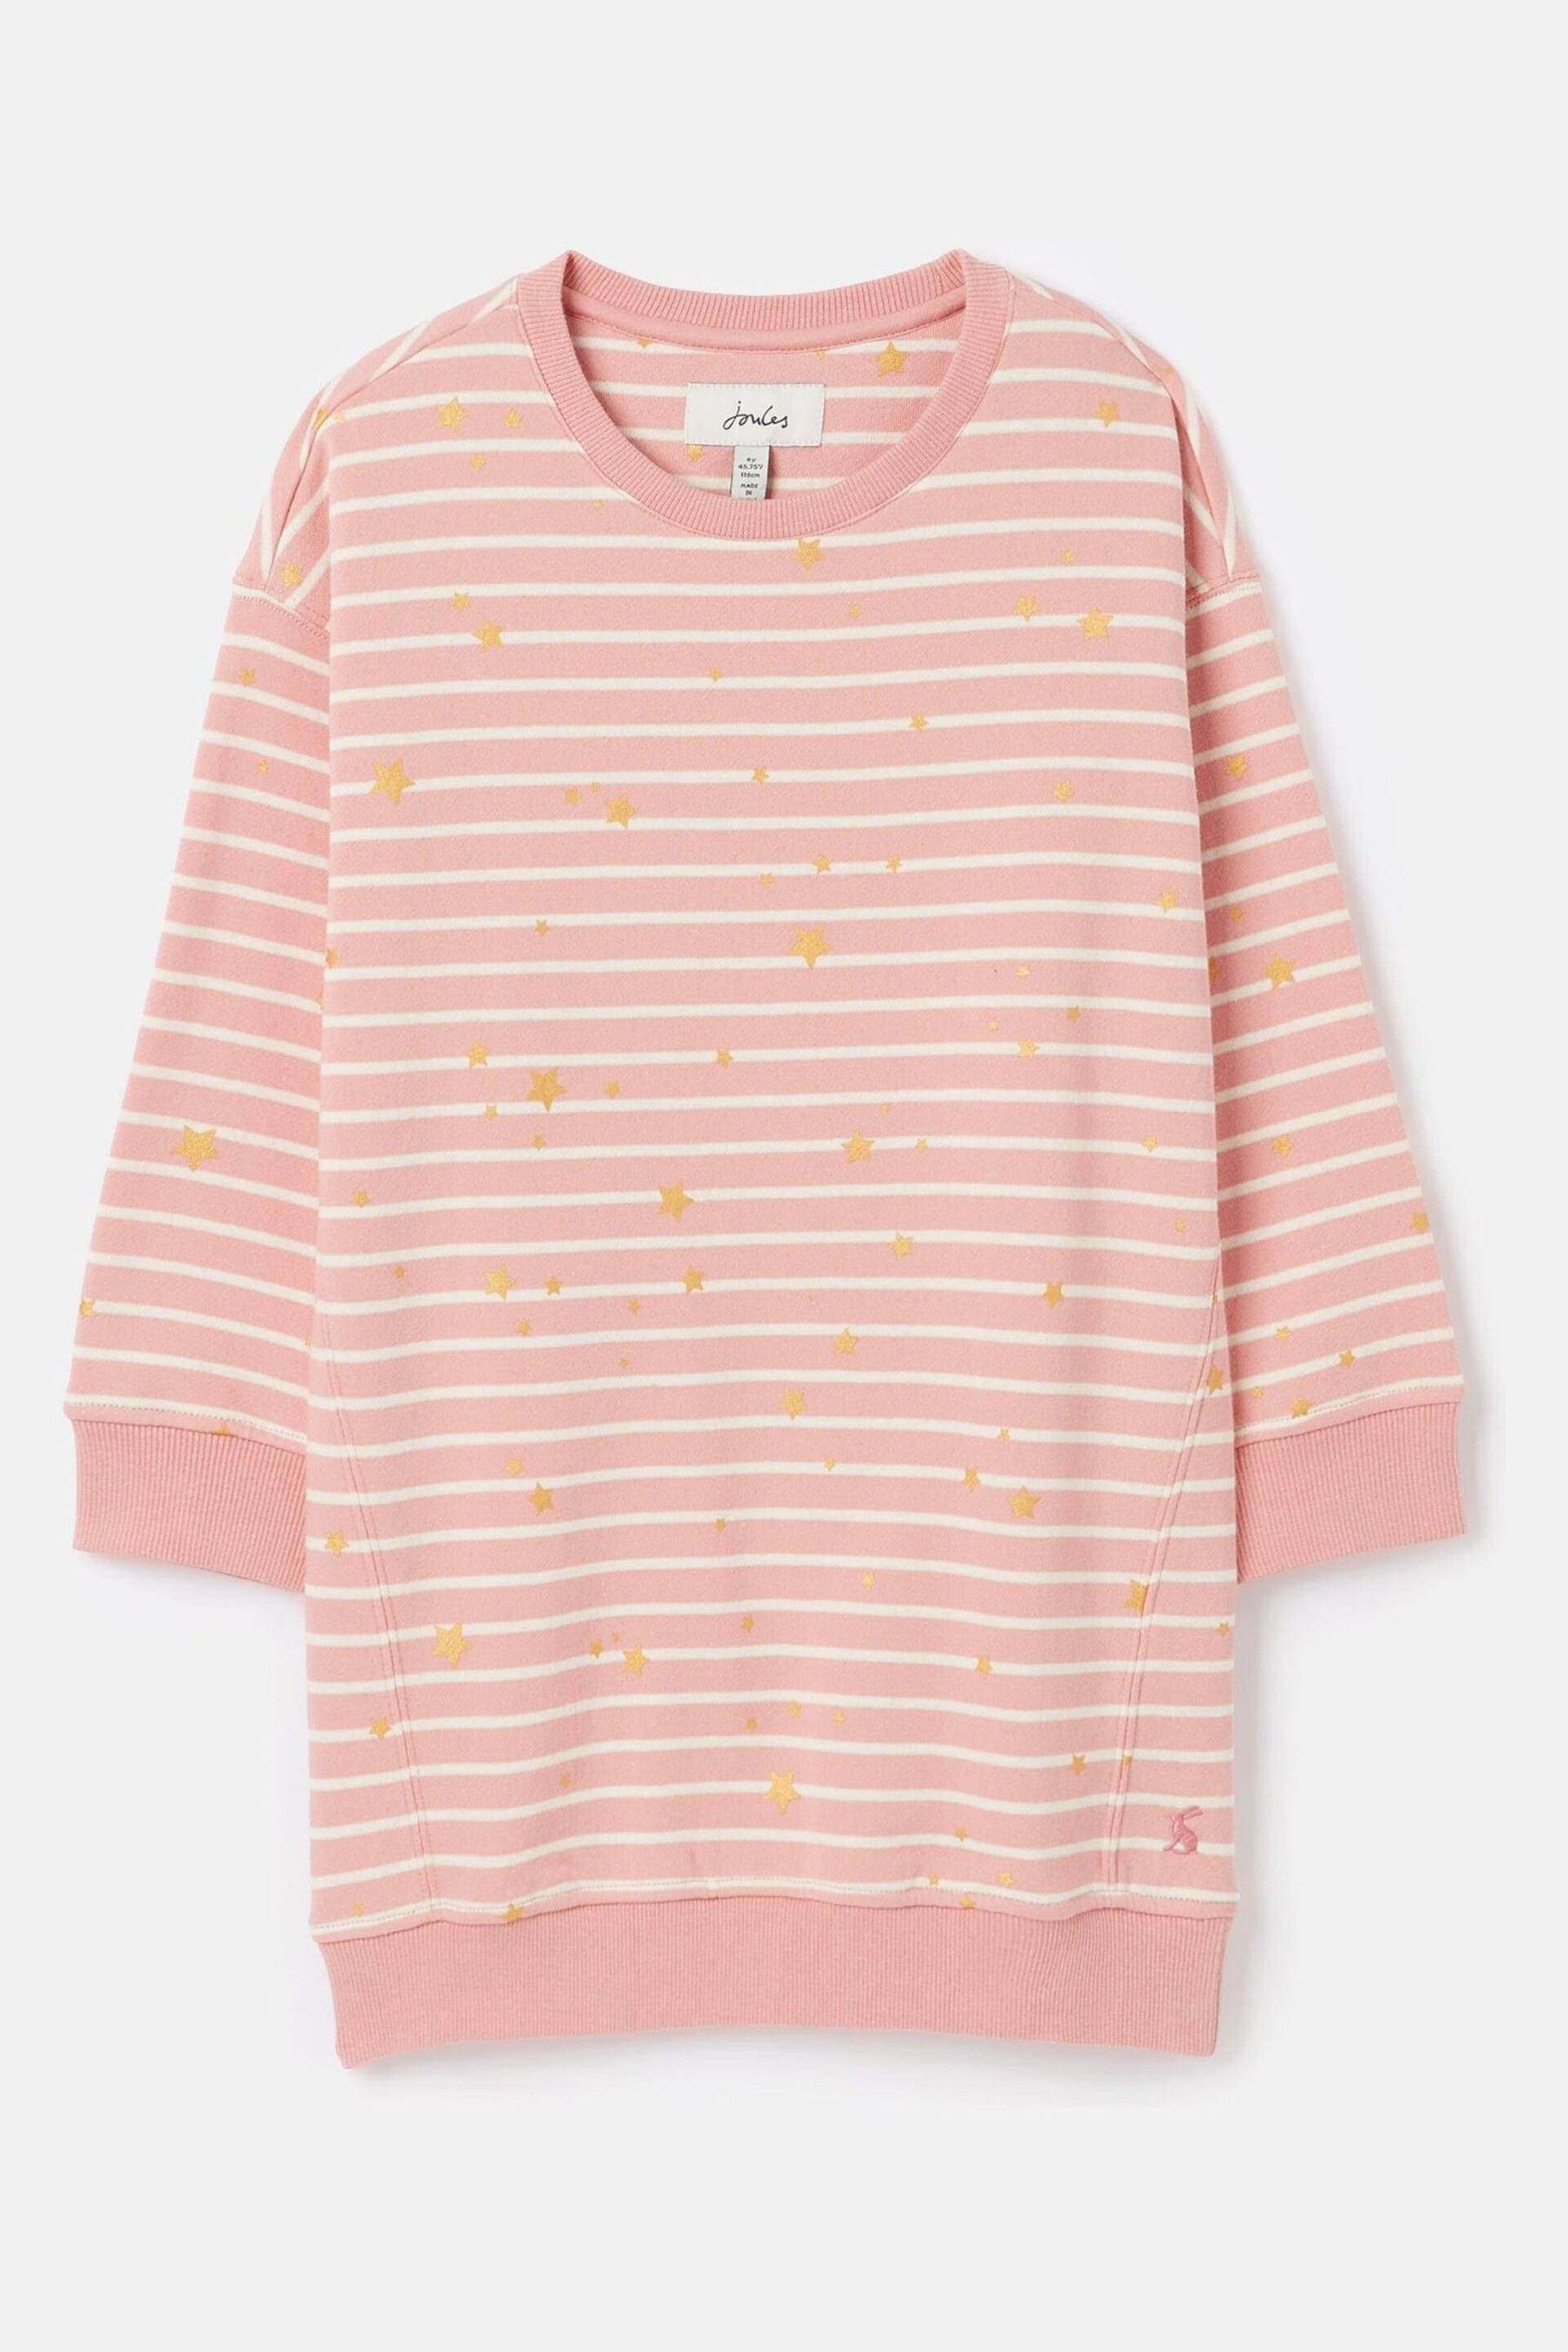 Joules Poppy Pink Striped Sweater Dress - Image 1 of 5